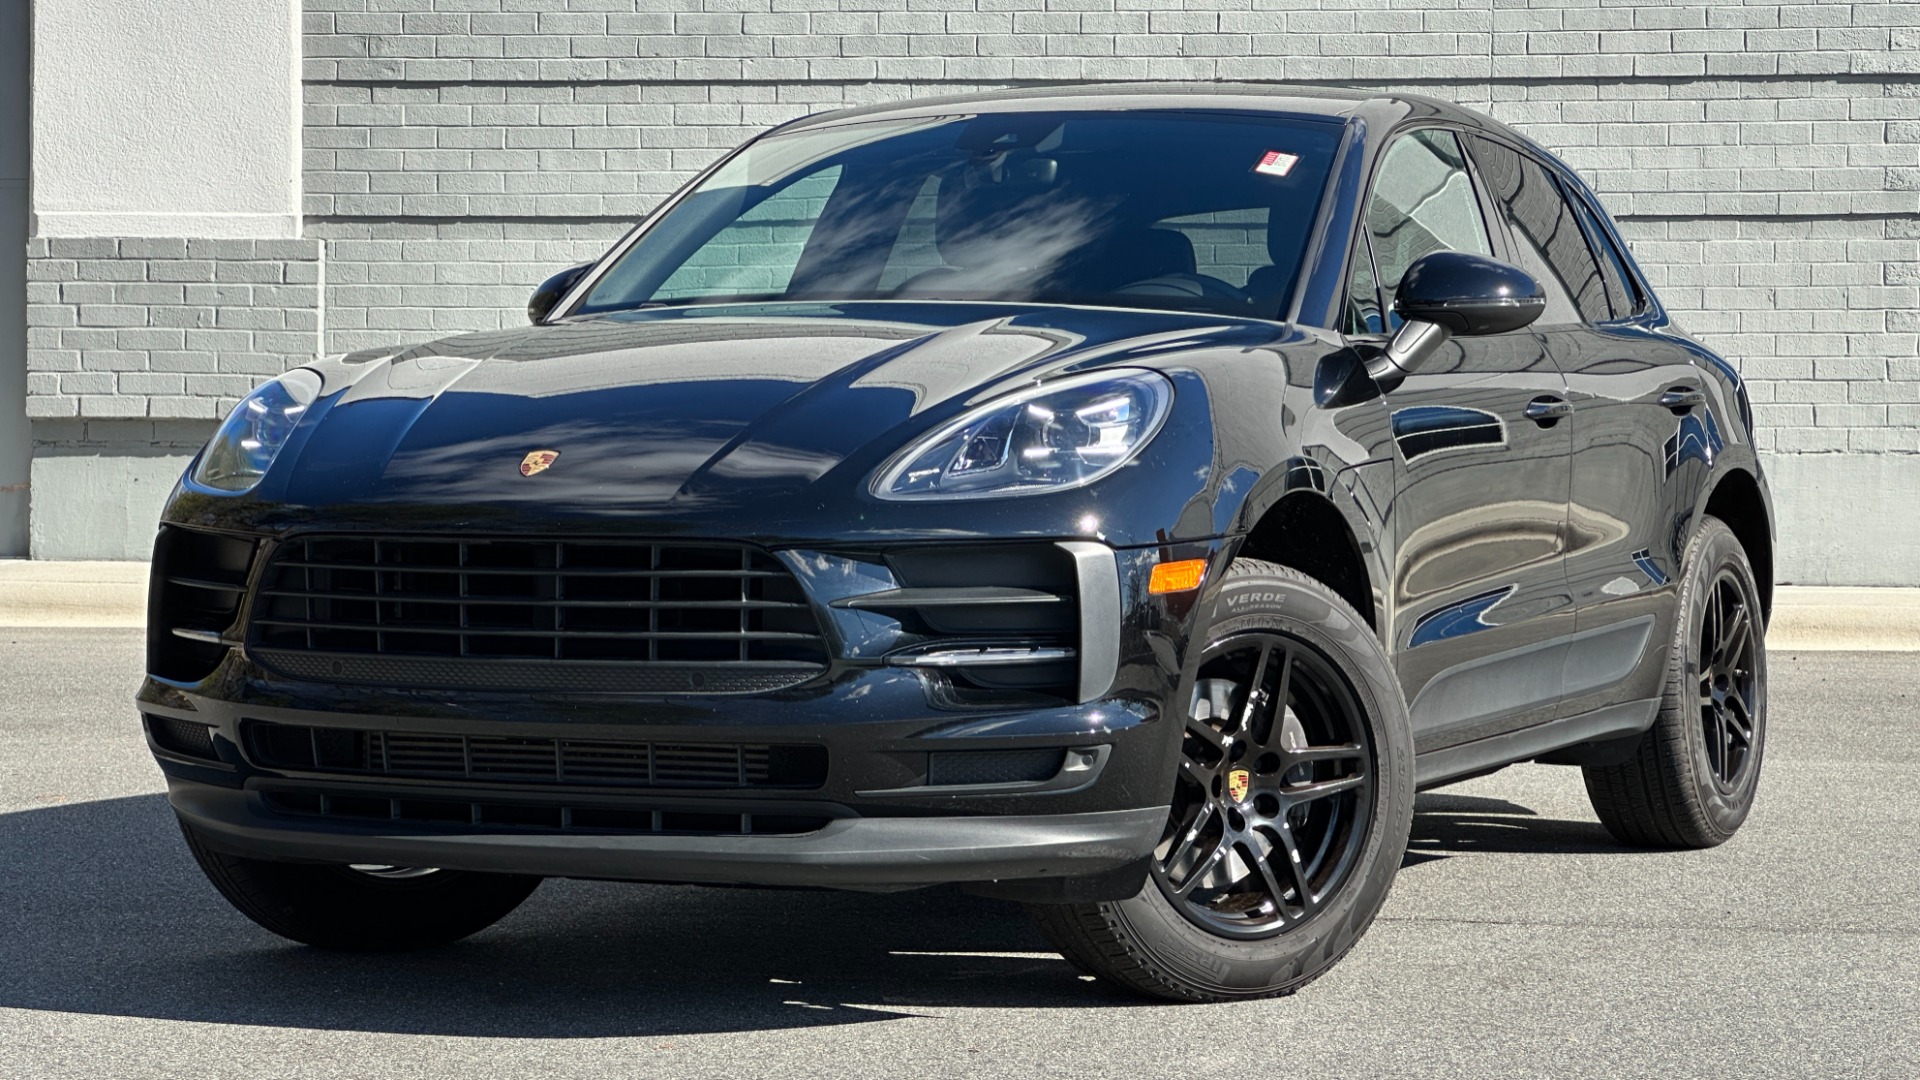 Used 2020 Porsche Macan PREMIUM PACKAGE / GLOSS BLACK TRIM / LANE ASSIST / 18IN MACAN S WHEELS for sale $44,995 at Formula Imports in Charlotte NC 28227 1